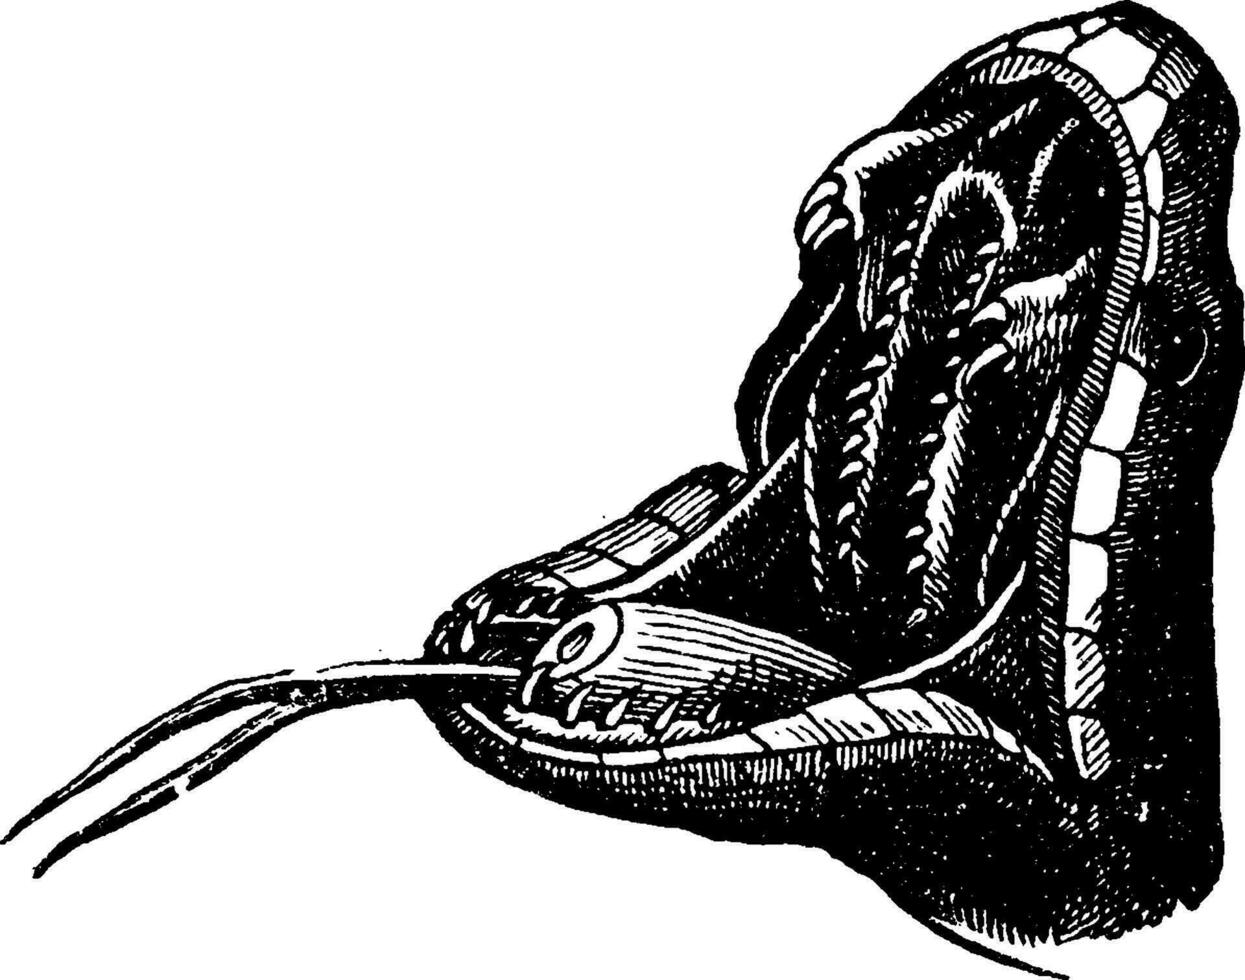 Viper mouth, vintage engraving. vector